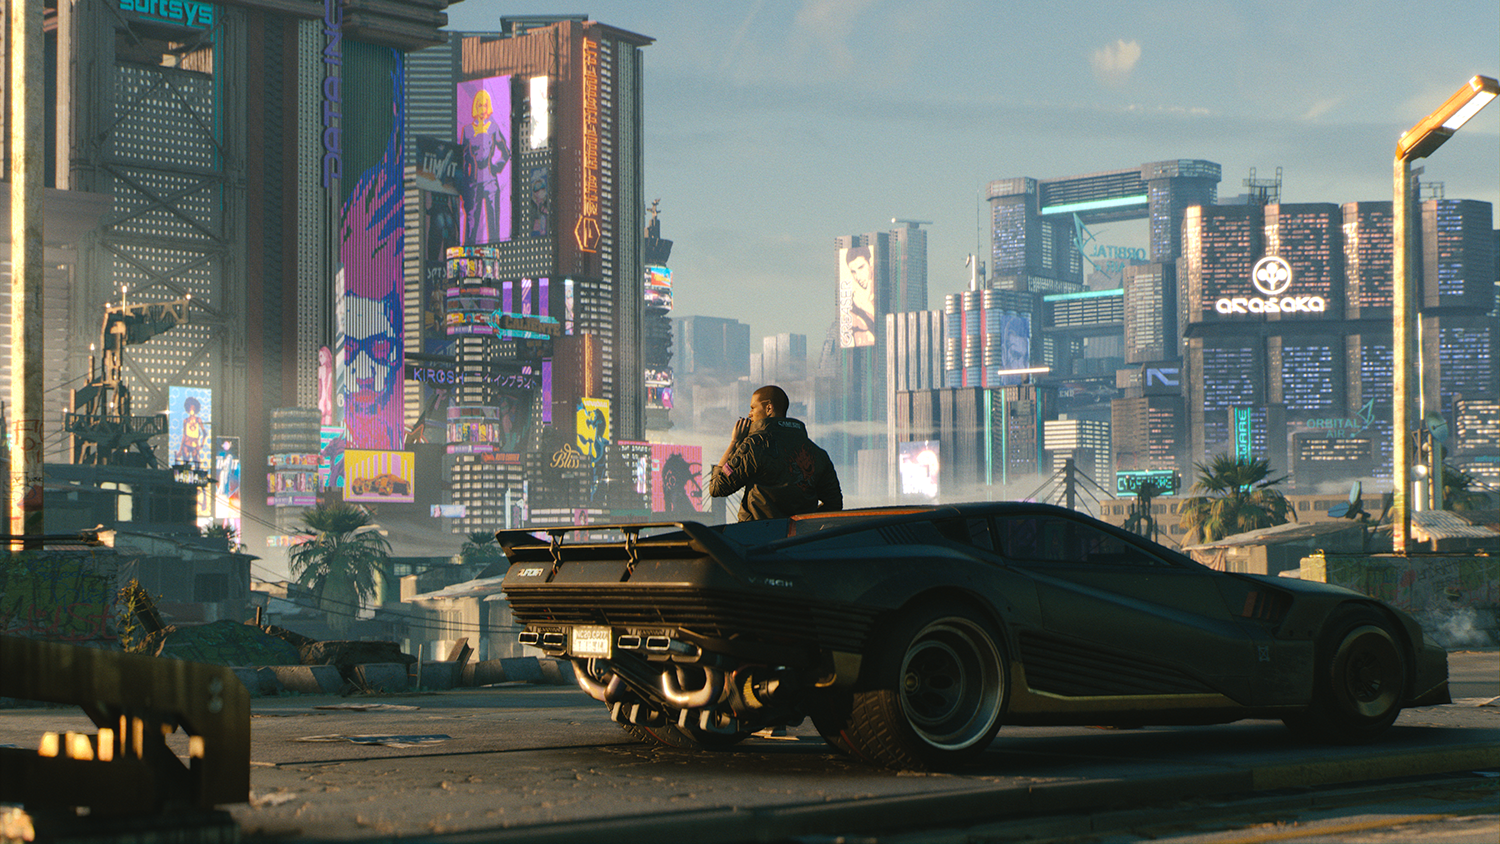 Cyberpunk 2077 character V poses in front of a car overlooking Night City